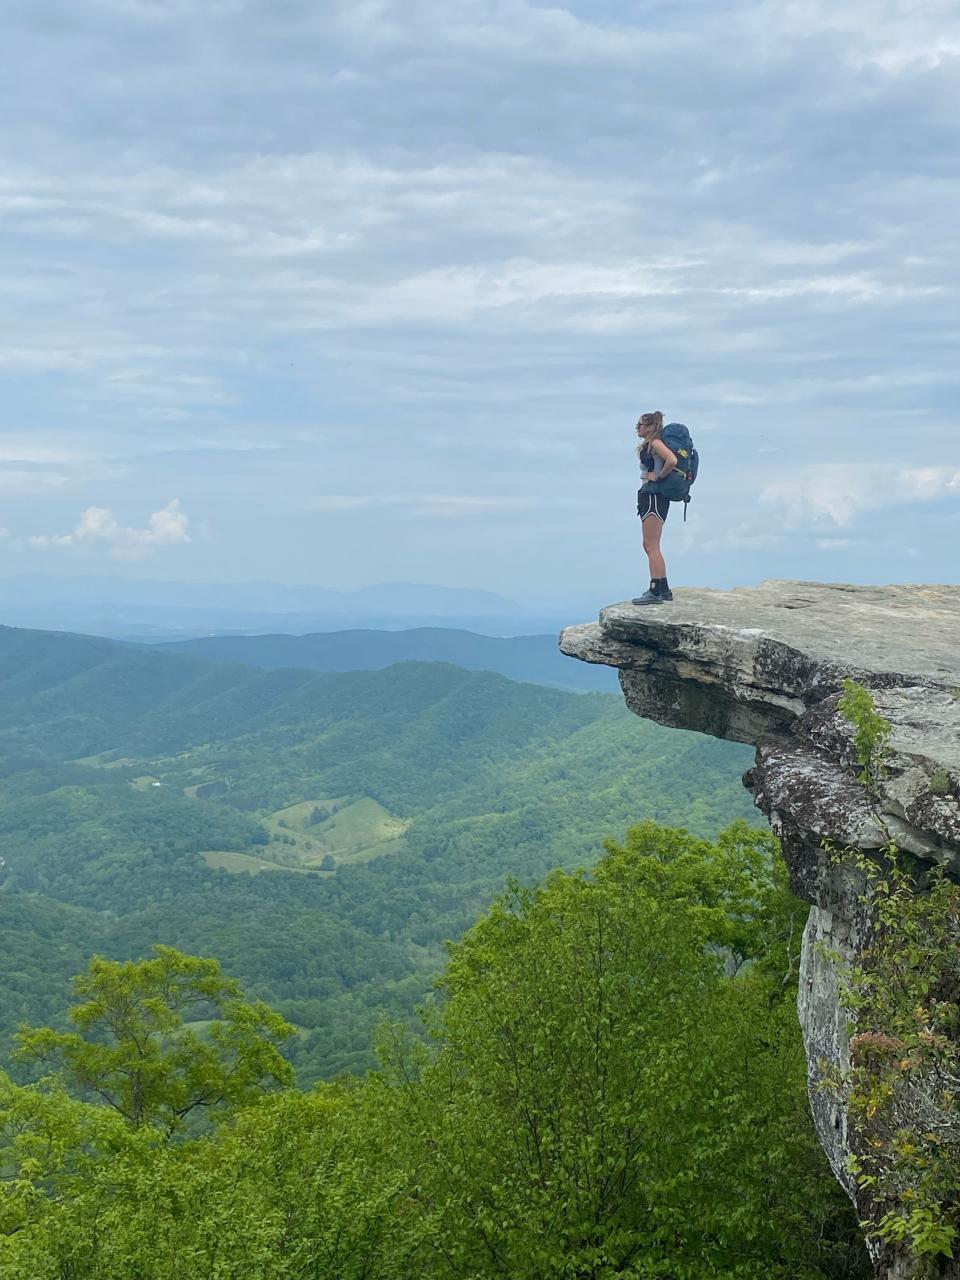 Poughkeepsie native Alexis Holzmann is photographed by a hiking partner atop the summit of a mountain during her hike of the Appalachian Trail this summer.